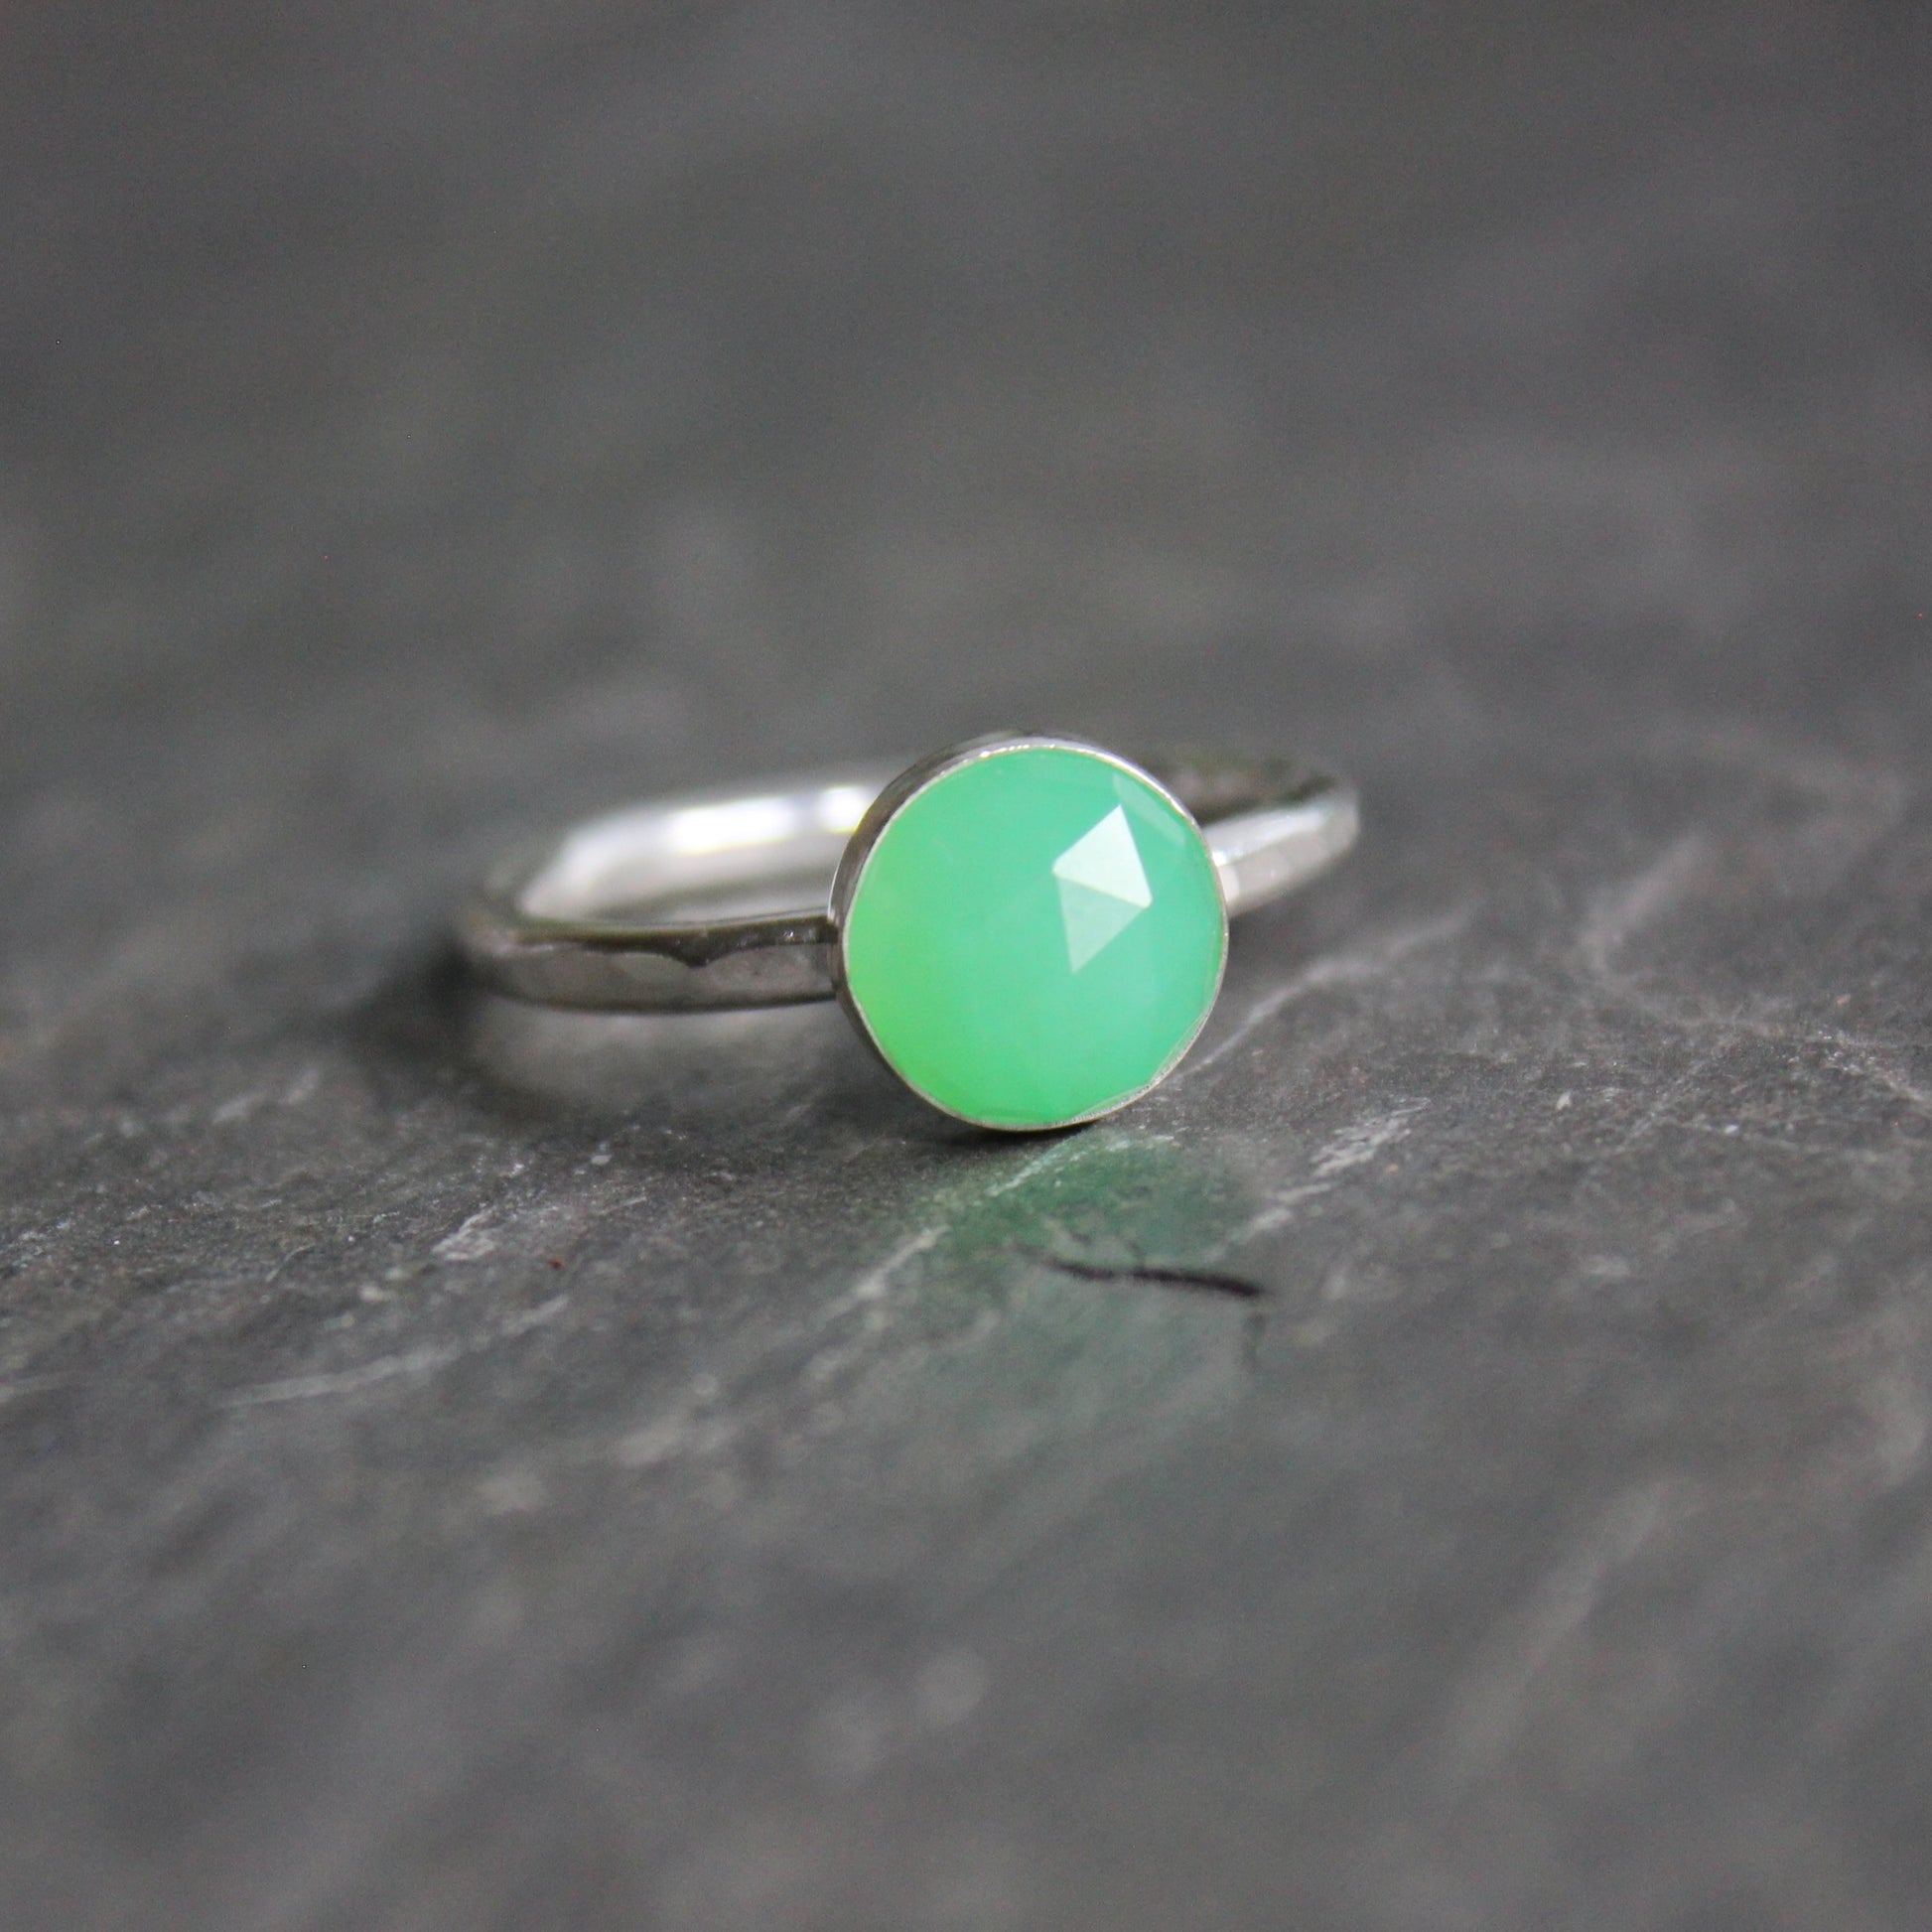 A 8mm rose cut round chrysoprase cabochon set in a sterling silver bezel setting on a sturdy silver band. 